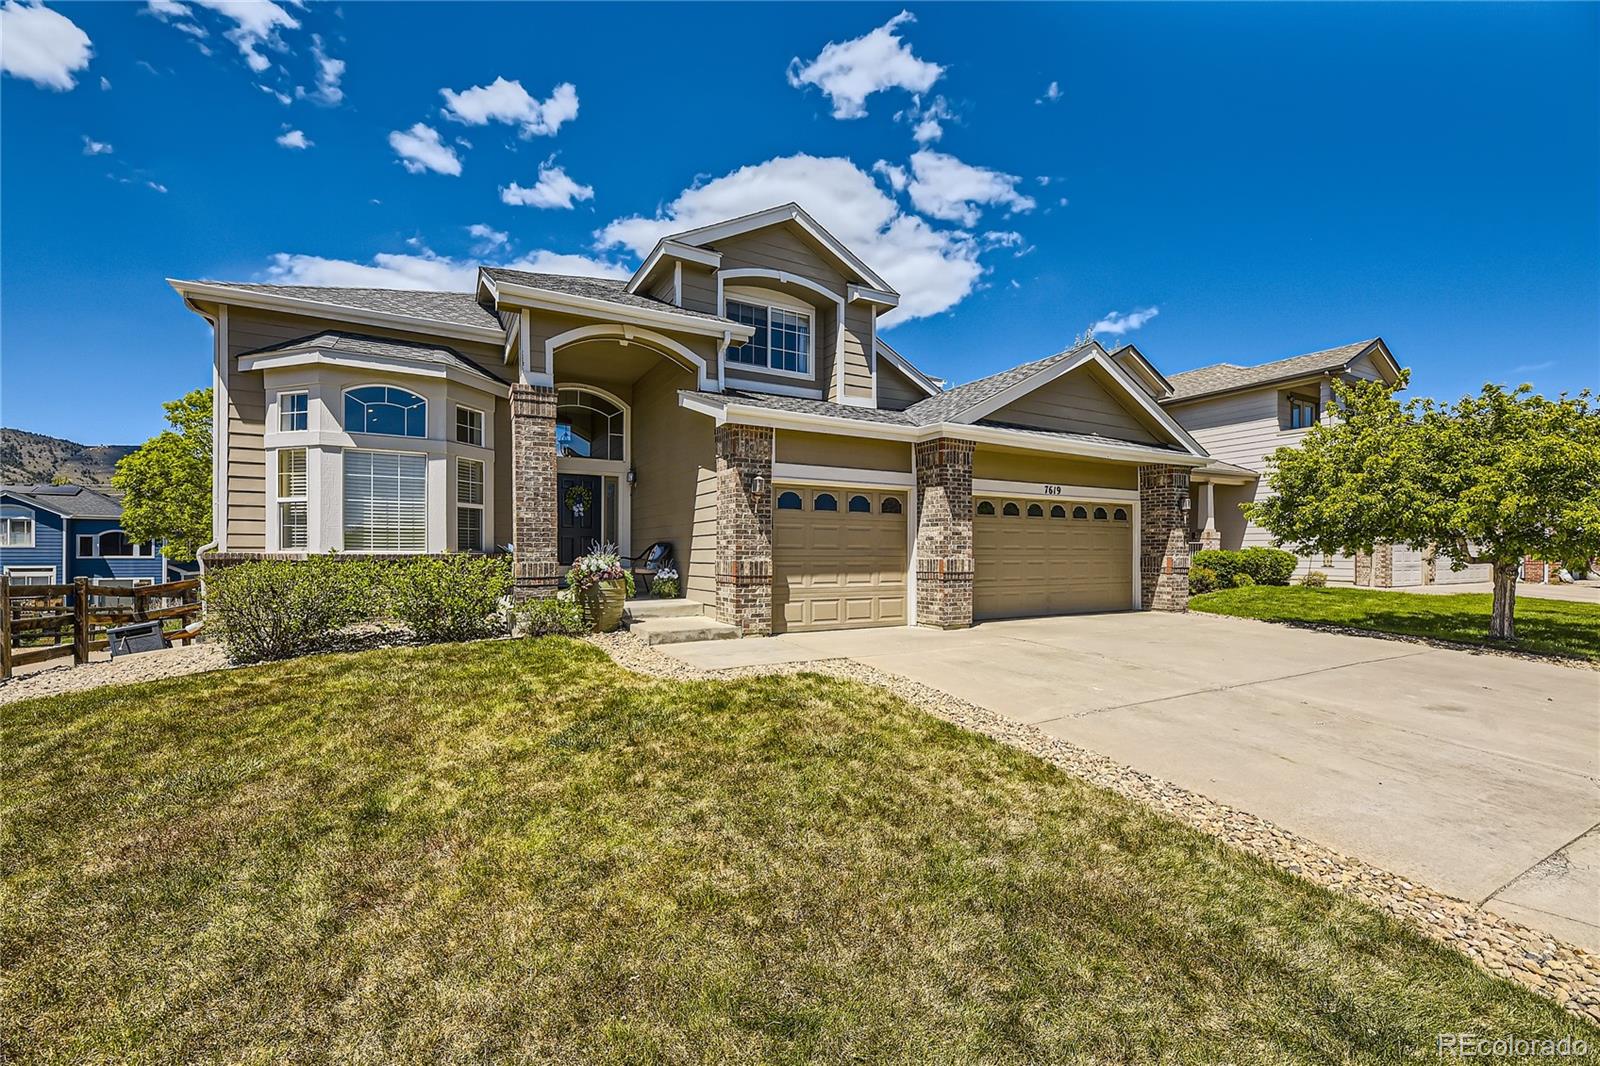 7619  bison court, Littleton sold home. Closed on 2024-06-17 for $795,000.